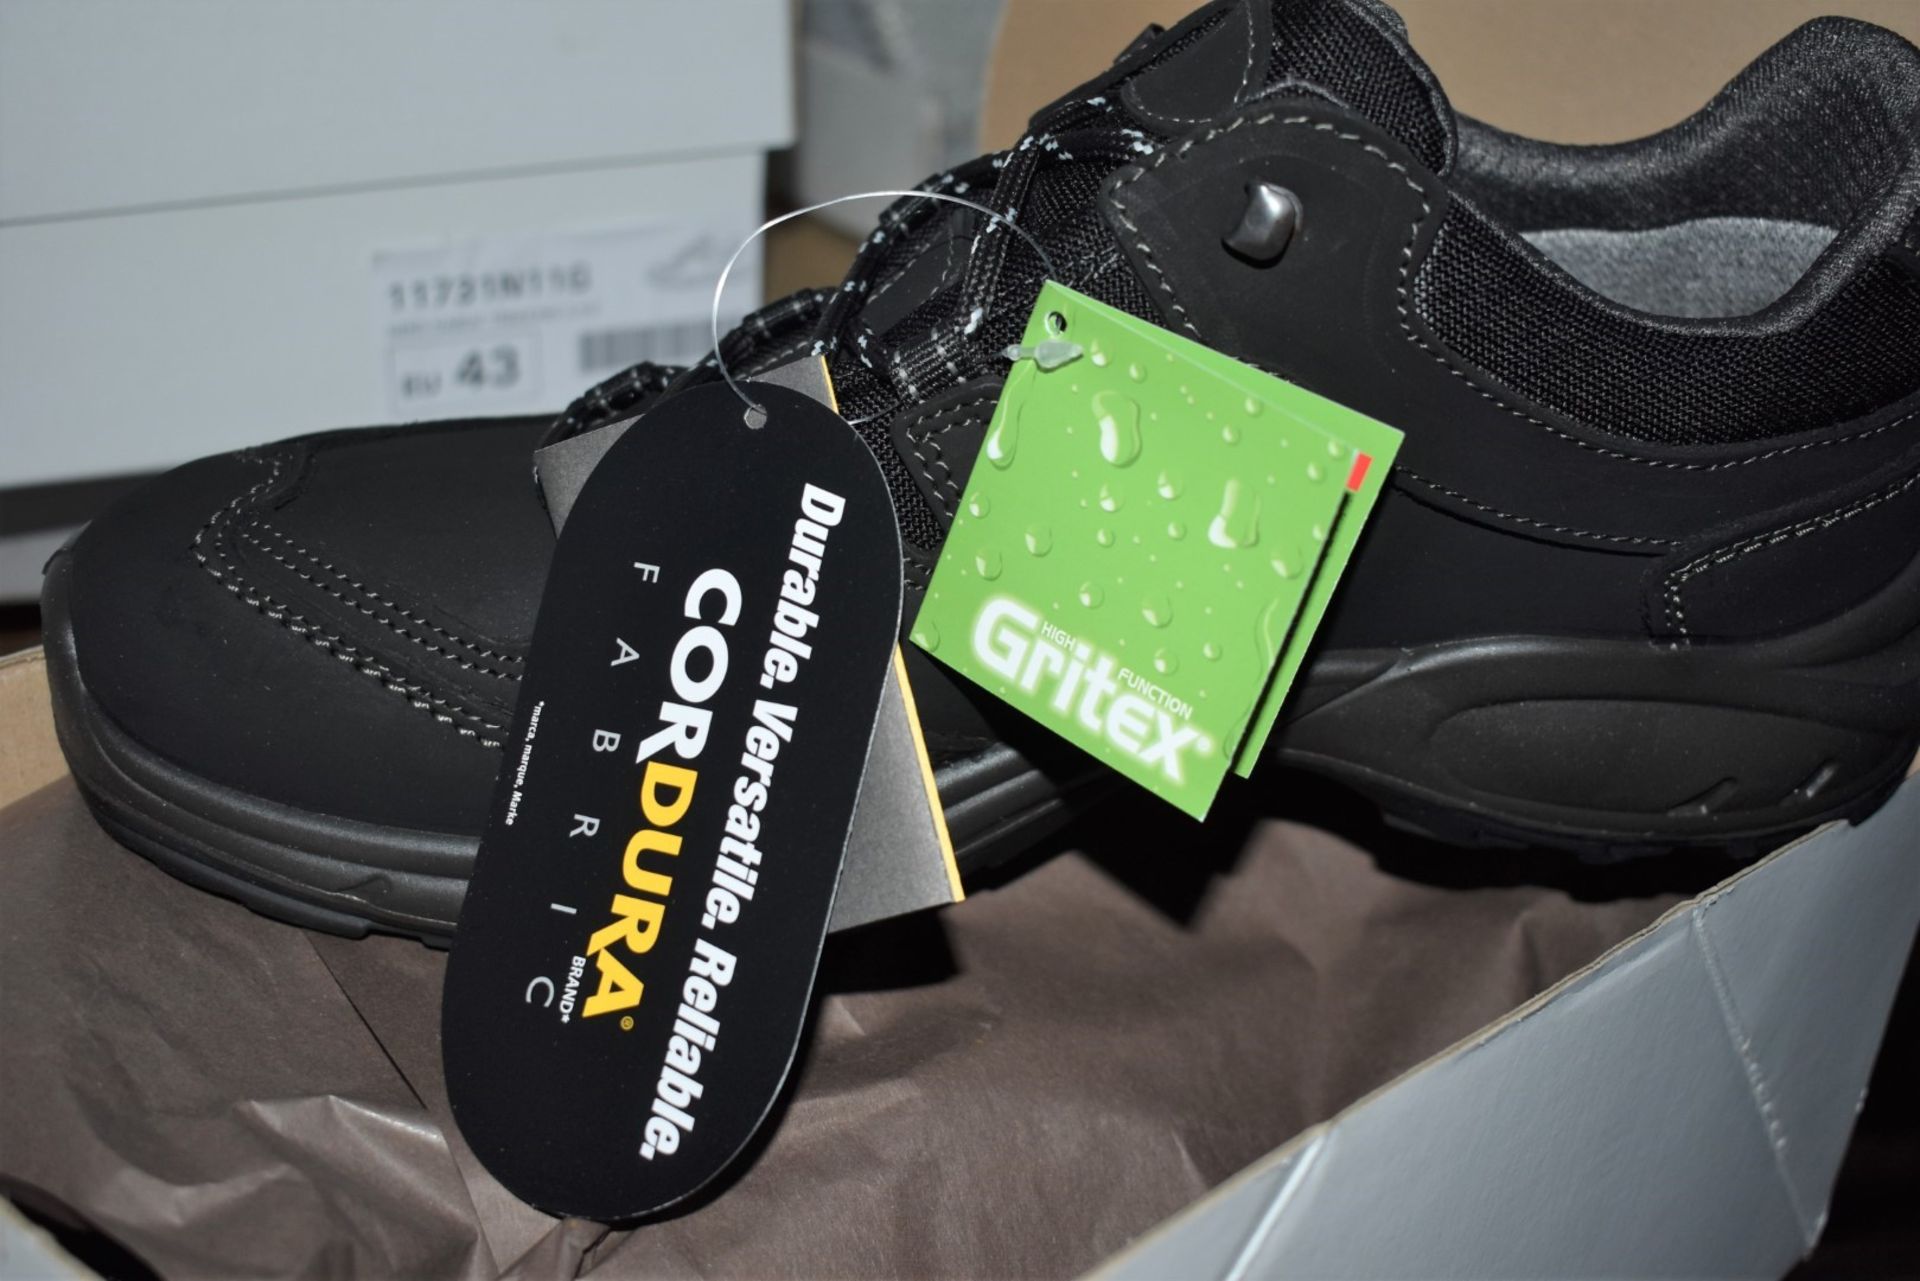 1 x Pair of Mens VIBRAM Walking Boots - Outdoor Pro Spo-Tex Trekking Boots With Support System - - Image 3 of 5